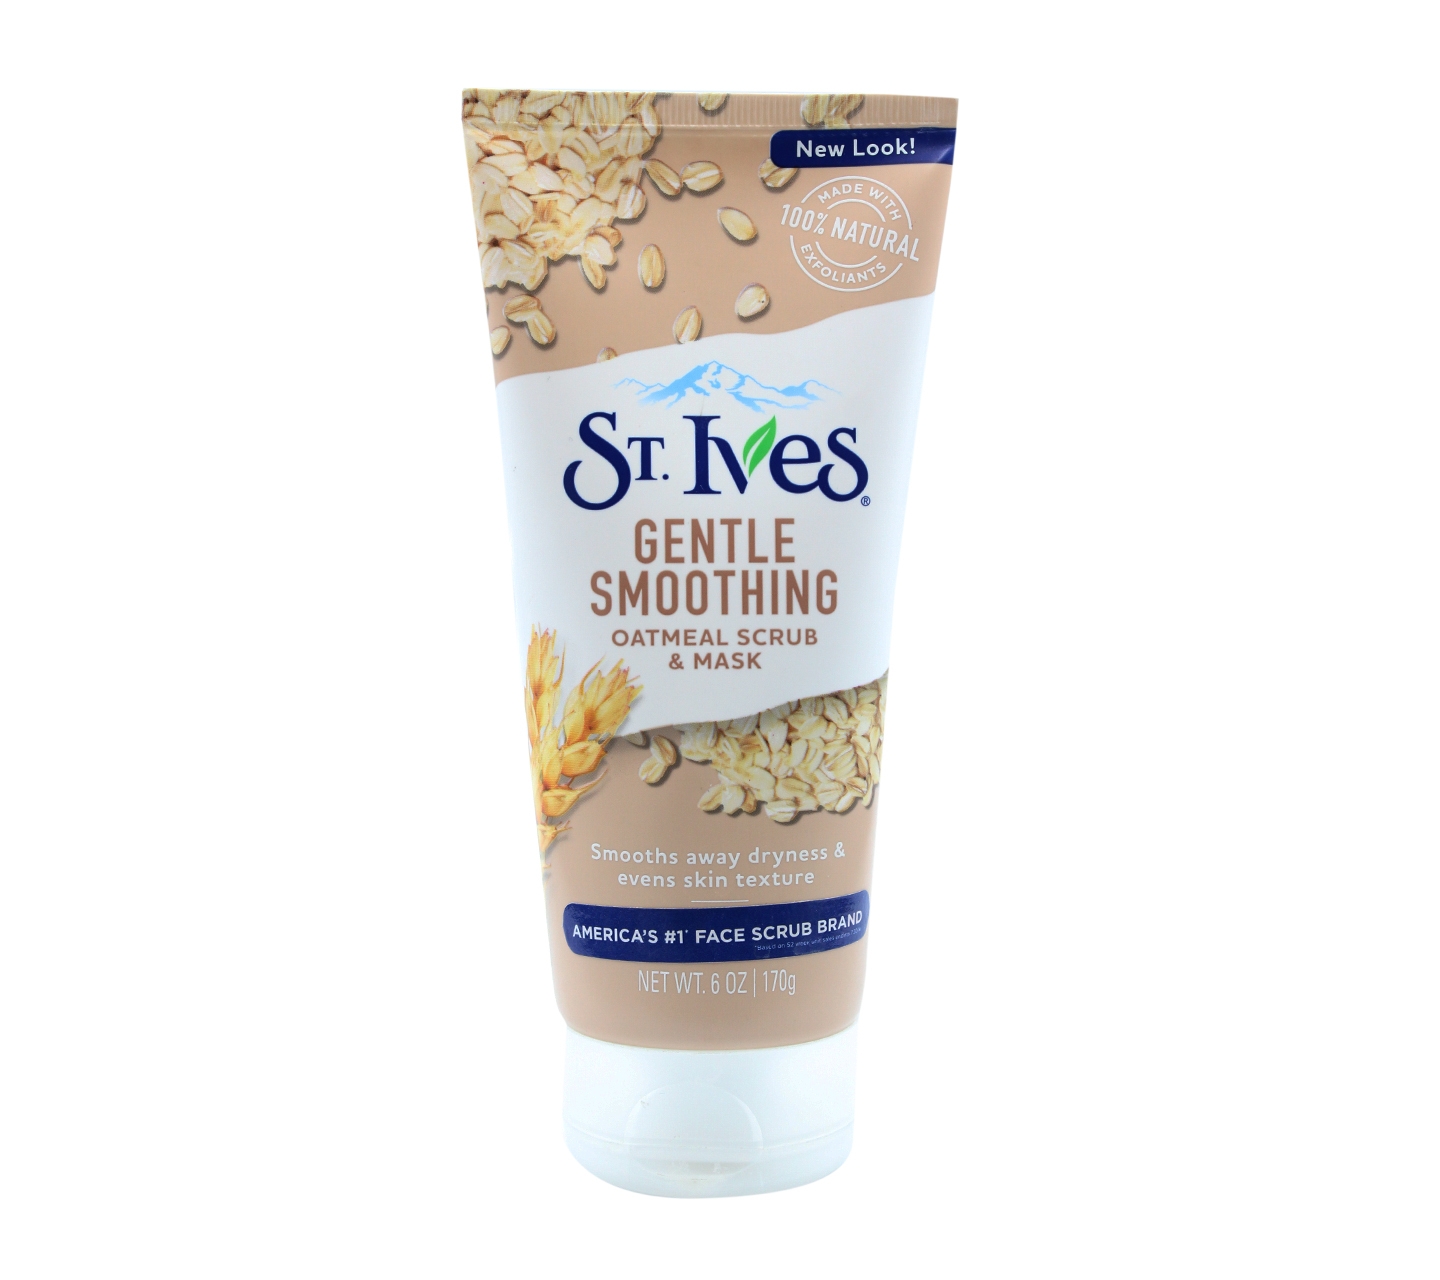 St Ives Gentle Smoothing Oatmeal Scrub & Mask Skin Care